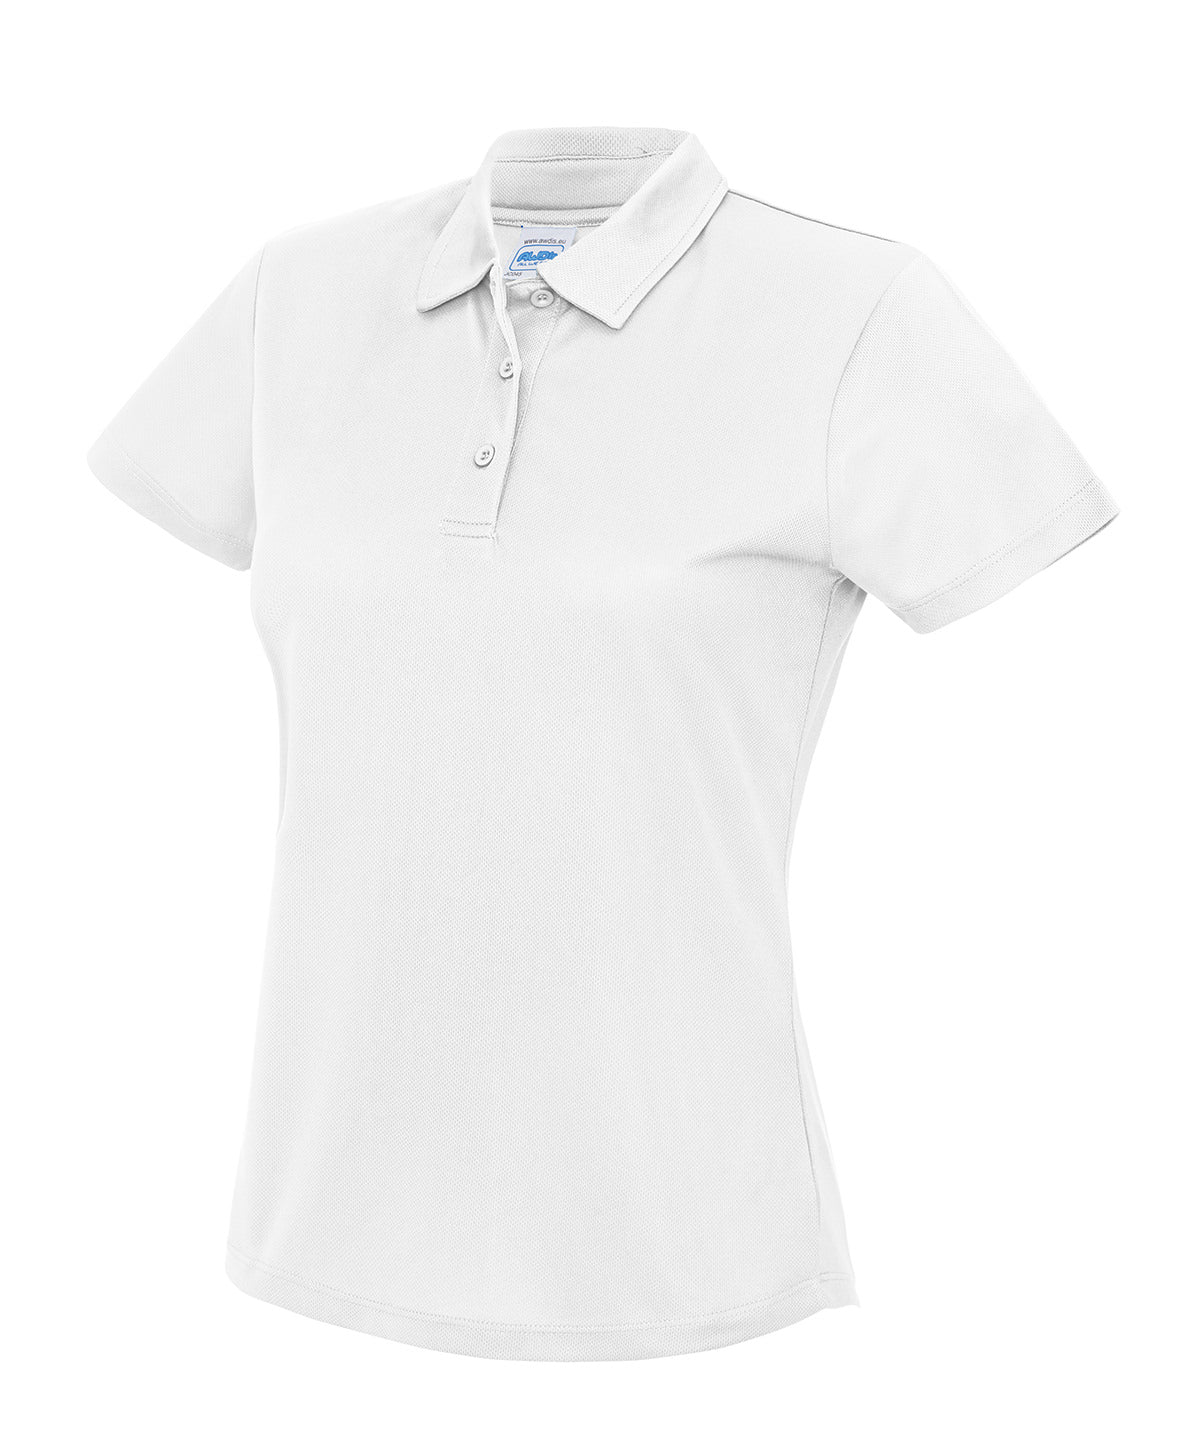 Personalised Polo Shirts - White AWDis Just Cool Women's cool polo